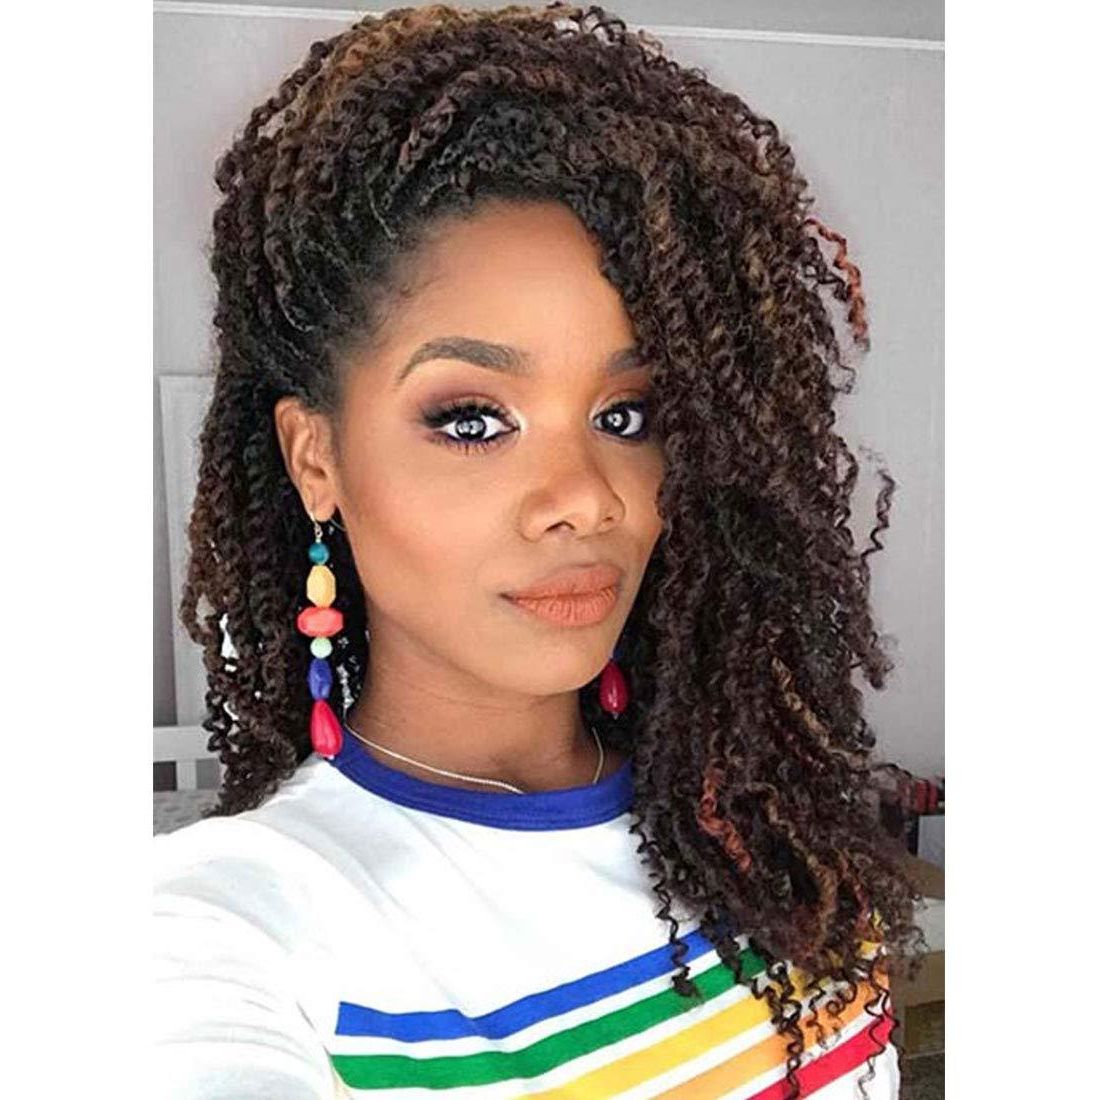 Hot Selling! 1pcs Kanekalon Crochet Hair Braids 8inch Soft Spring Twist  Hair Extension Micro Synthetic Curly Weave Crochet Braids 30roots Intended For Most Up To Date Twists Micro Braid Hairstyles With Curls (View 16 of 20)